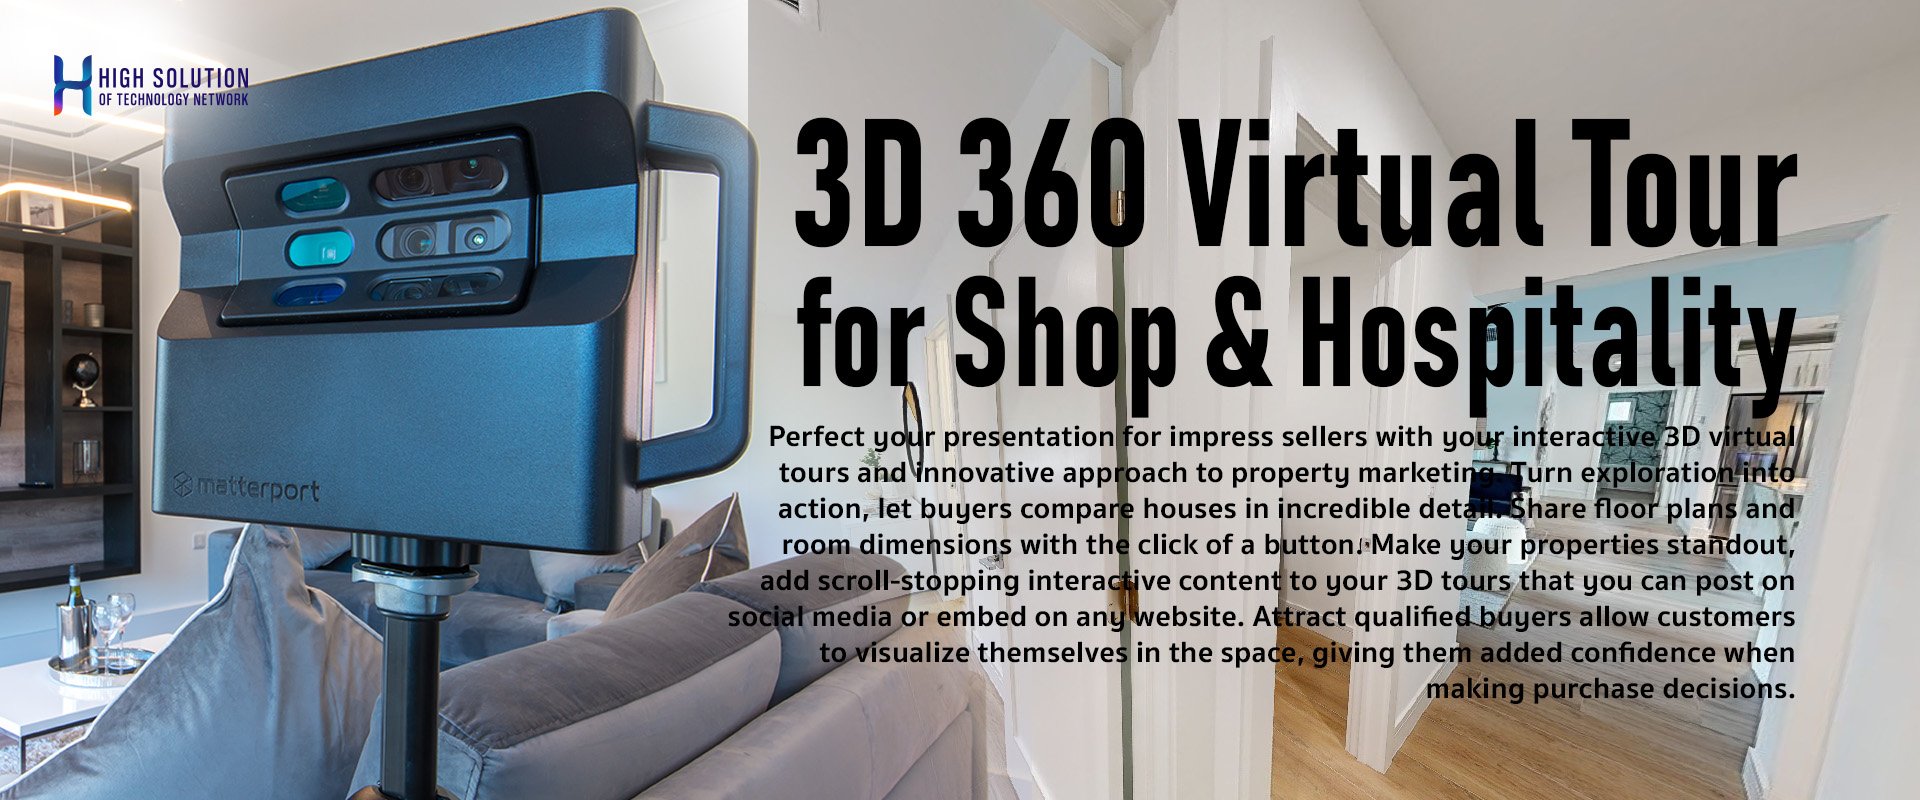 3d_360_virtual_Tour_For_Shop_Hospitality_By_Highsolution